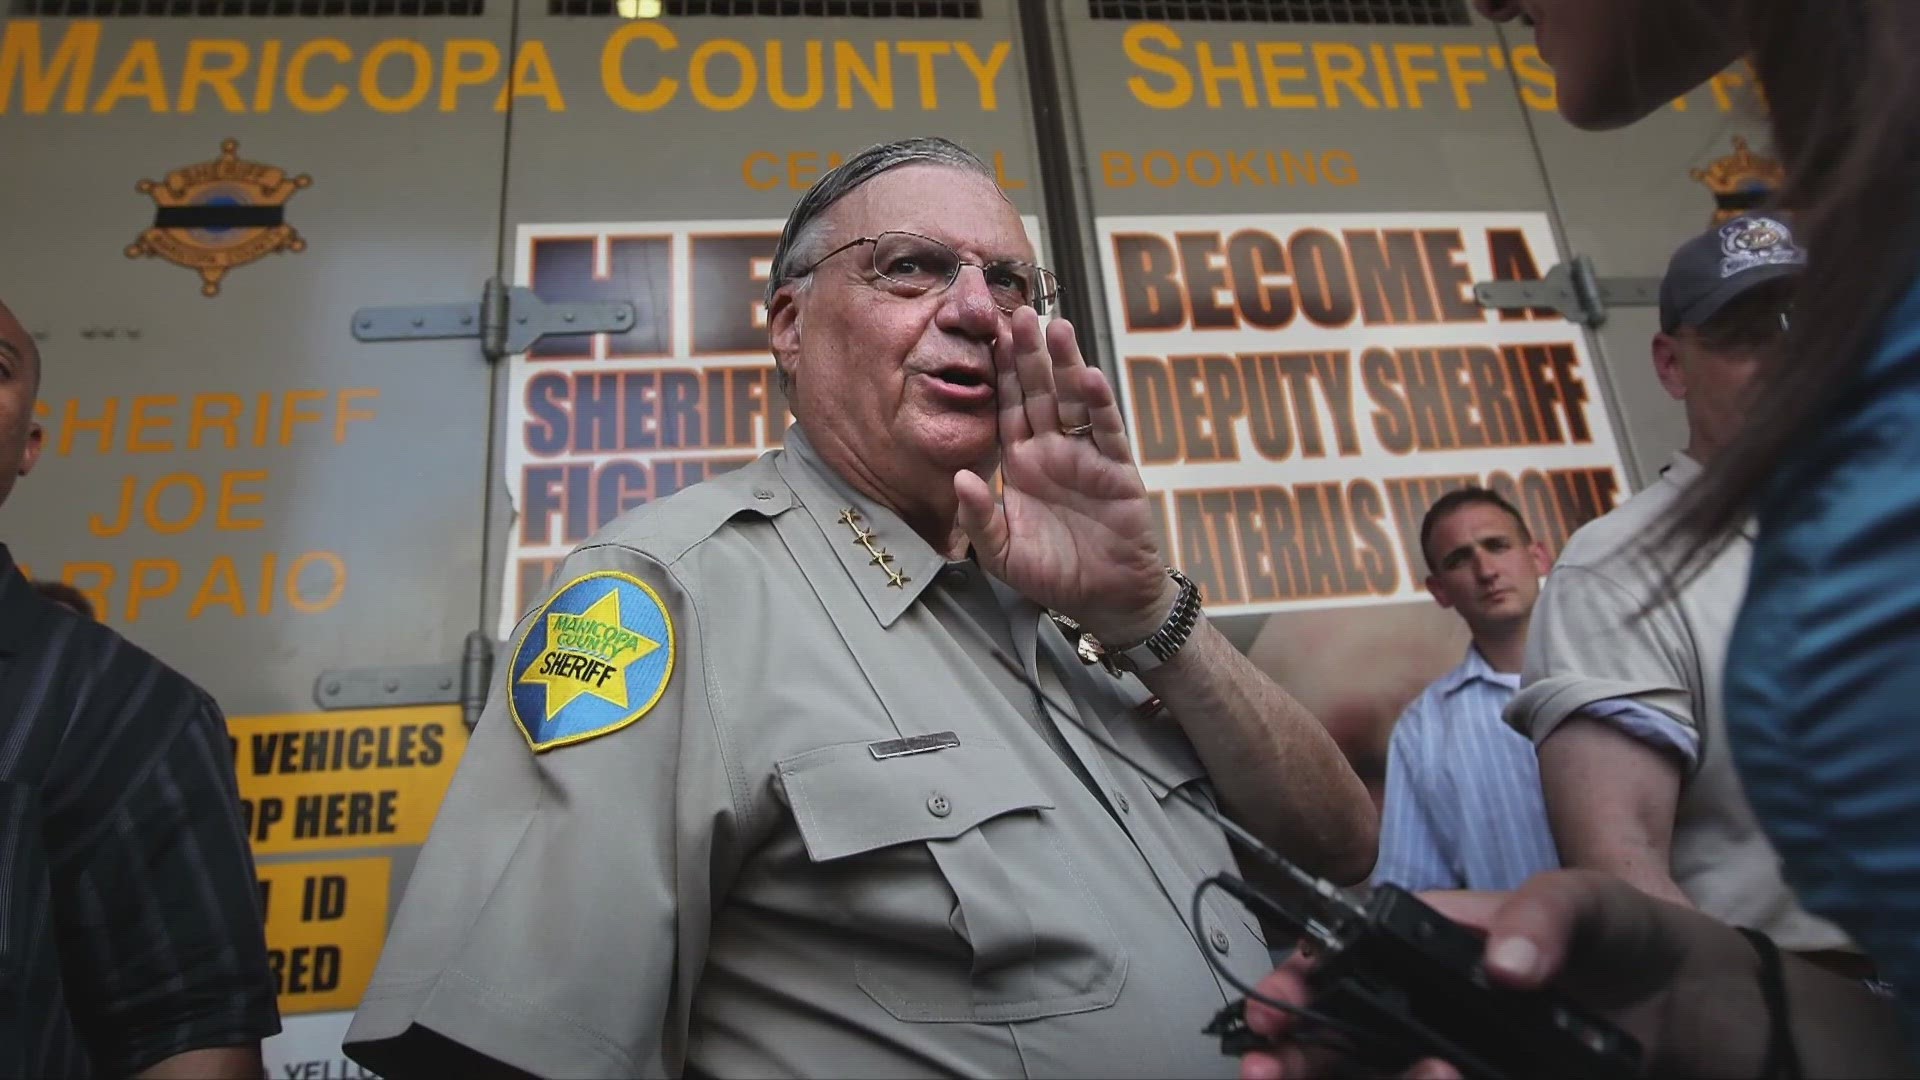 Arpaio officially announced his candidacy Wednesday.